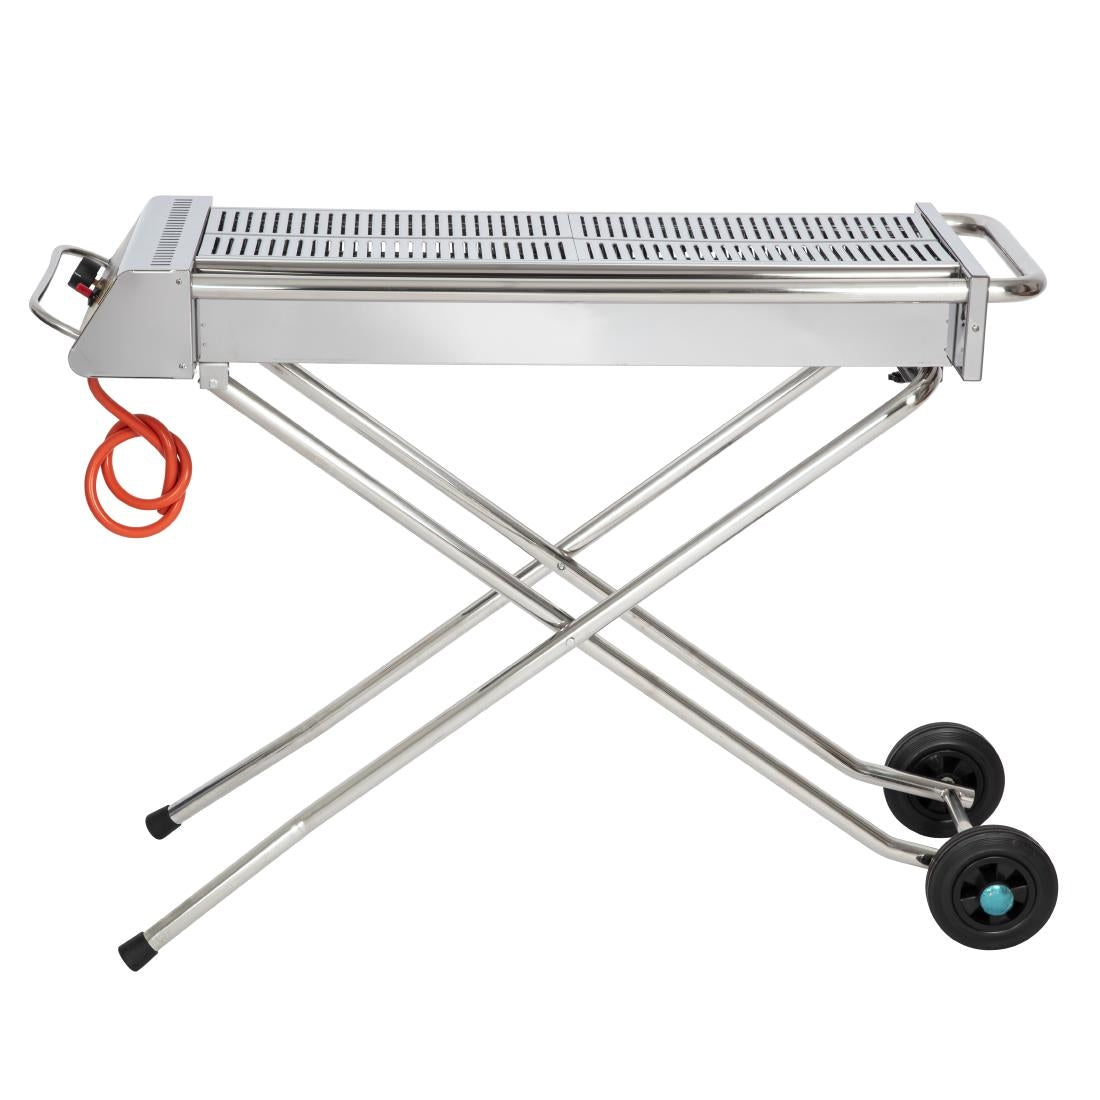 Buffalo Folding Propane Gas Barbecue P111 JD Catering Equipment Solutions Ltd